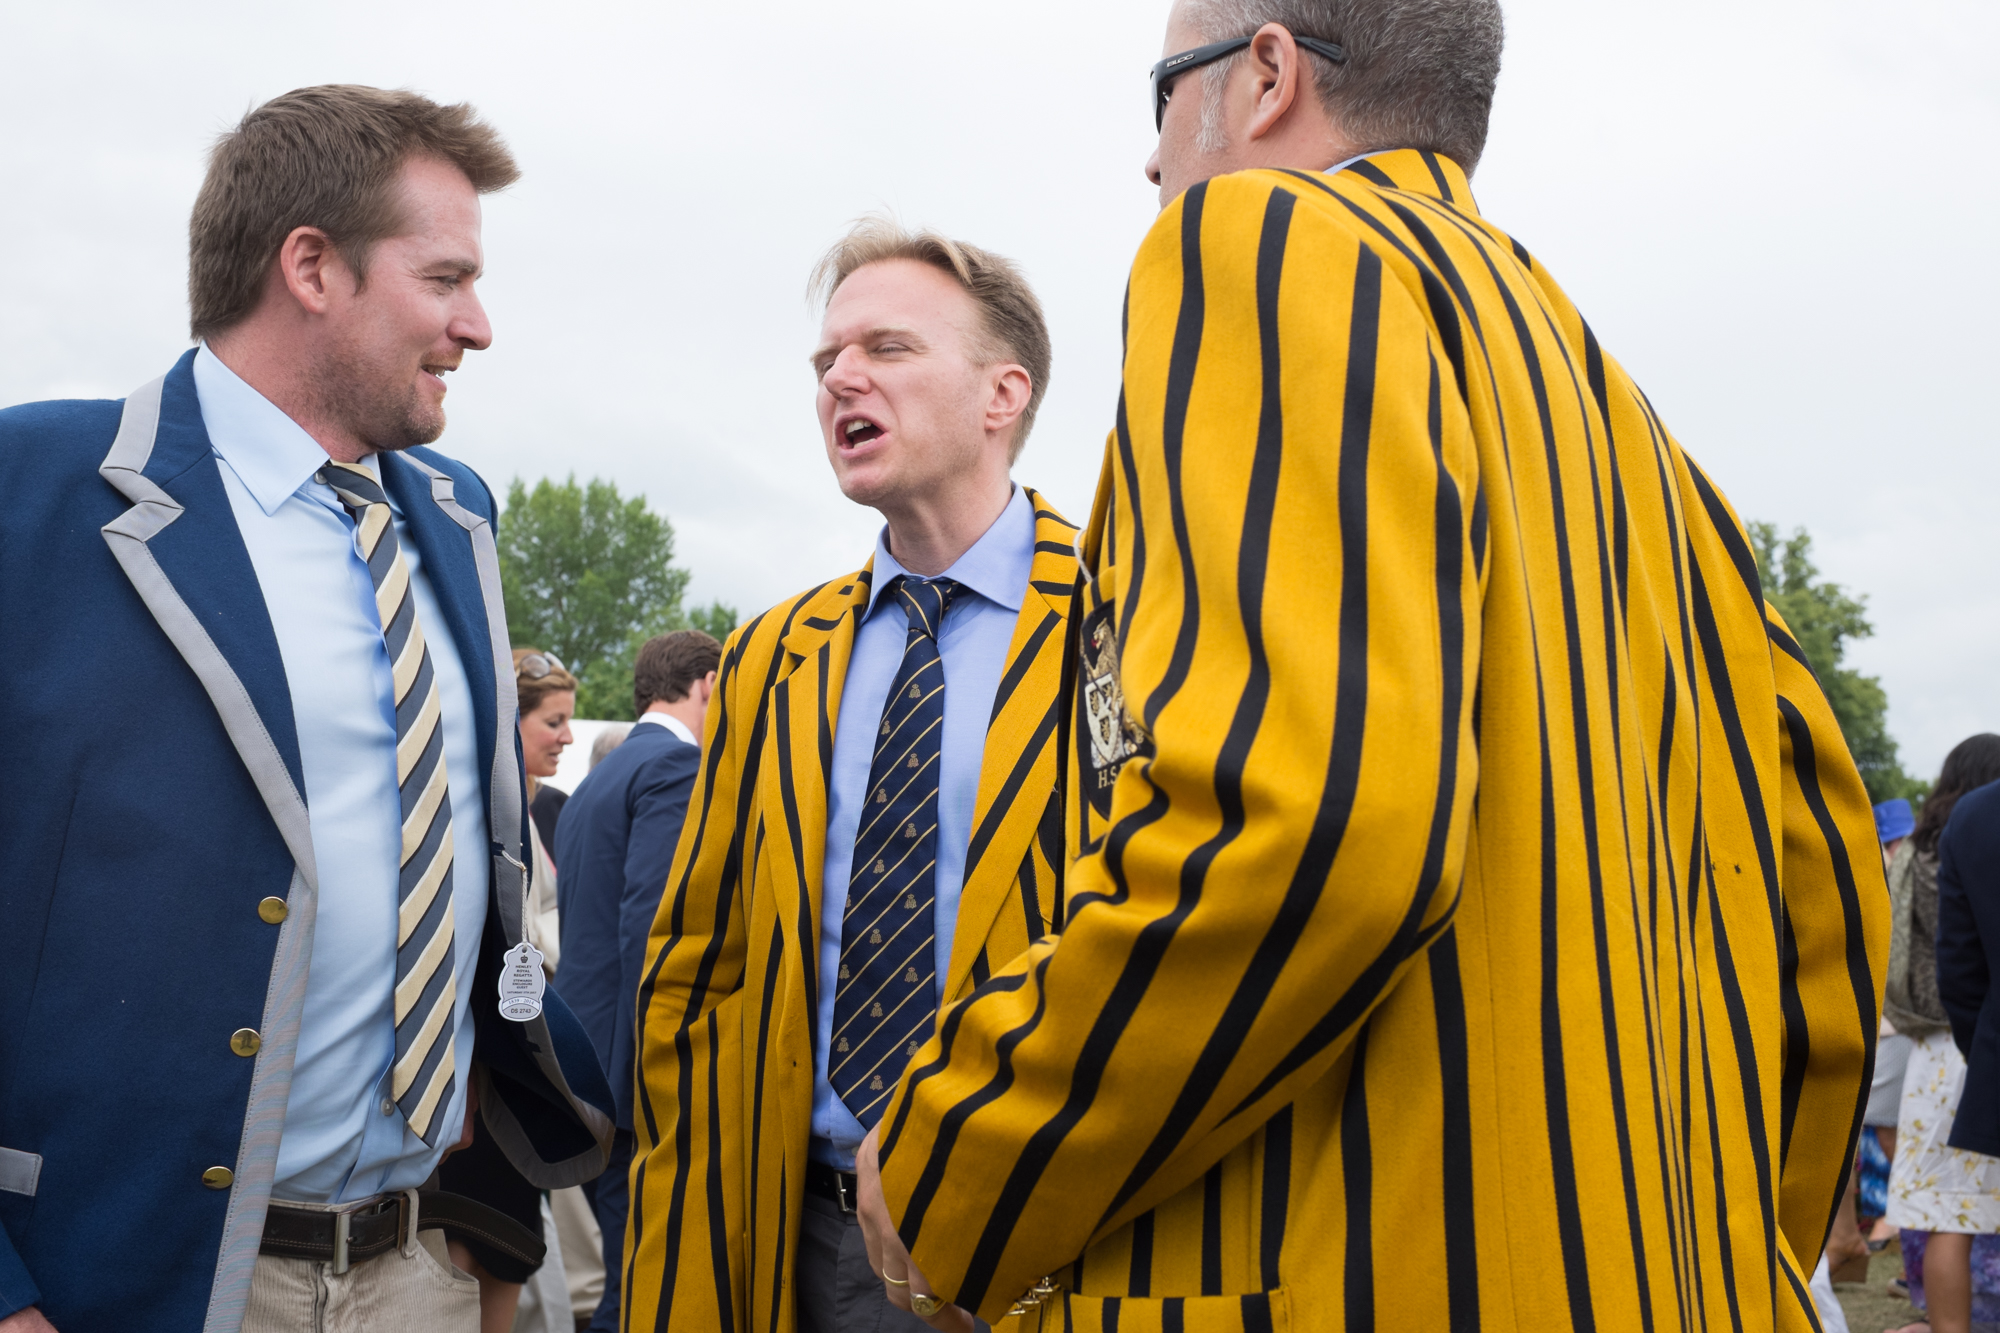  Catching up with friends at Henley Royal Regatta. Lots of spectators have been coming to the regatta for a great many years, and still wear their club colours with pride. 